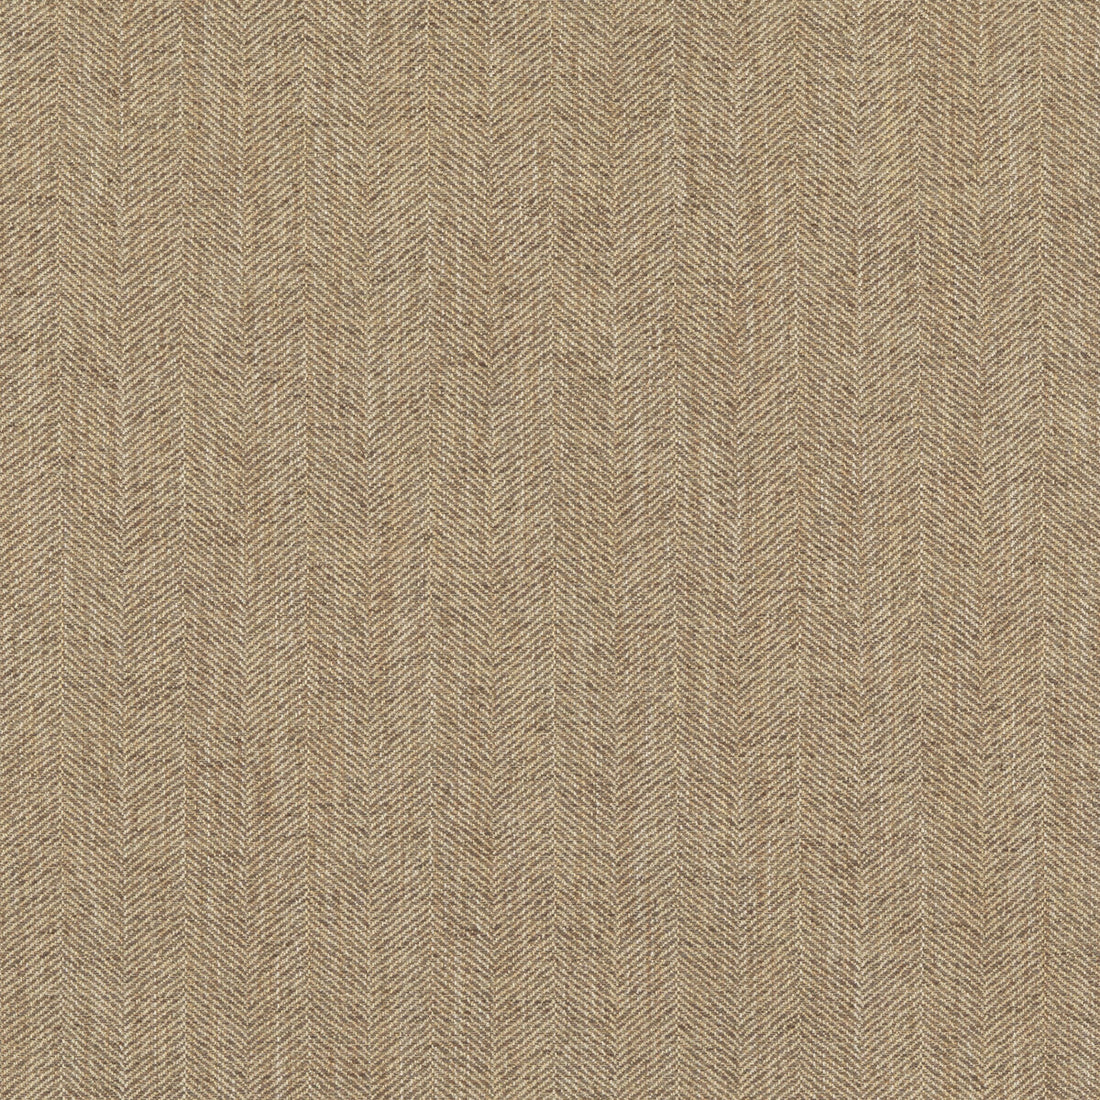 Grand Canyon fabric in bronze color - pattern BF10878.850.0 - by G P &amp; J Baker in the Essential Colours II collection